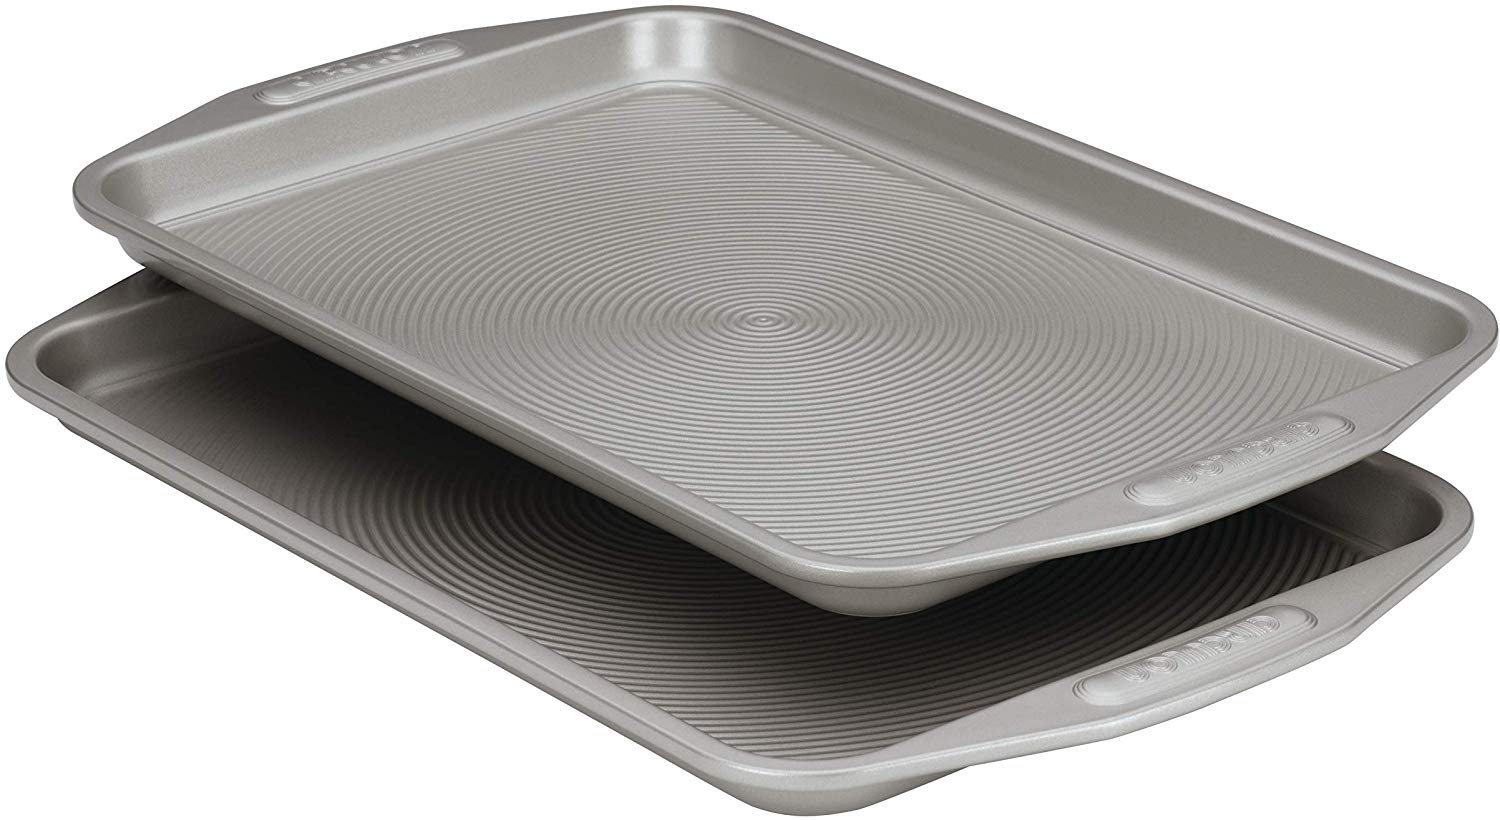  Mrs. Anderson's Baking Jelly Roll Pan, 10.25-Inches x  15.25-Inches, Heavyweight Commercial Grade 19-Gauge Aluminum: Home & Kitchen